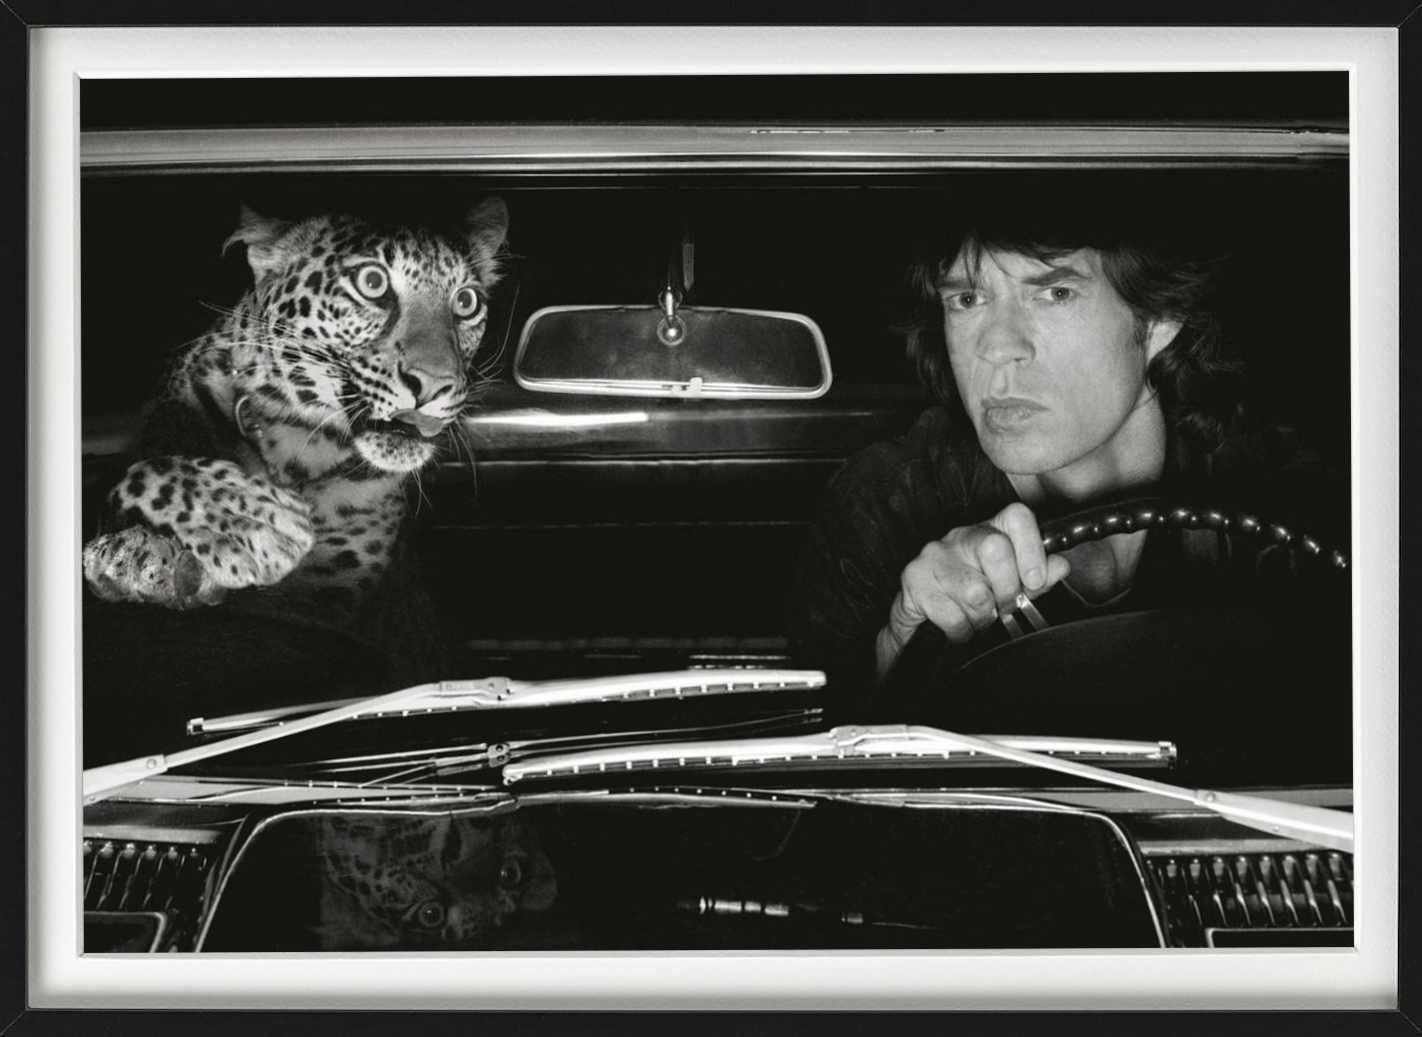 Mick Jagger in a Car with Leopard, LA - b&w fine art photography, 1992 - Black Black and White Photograph by Albert Watson